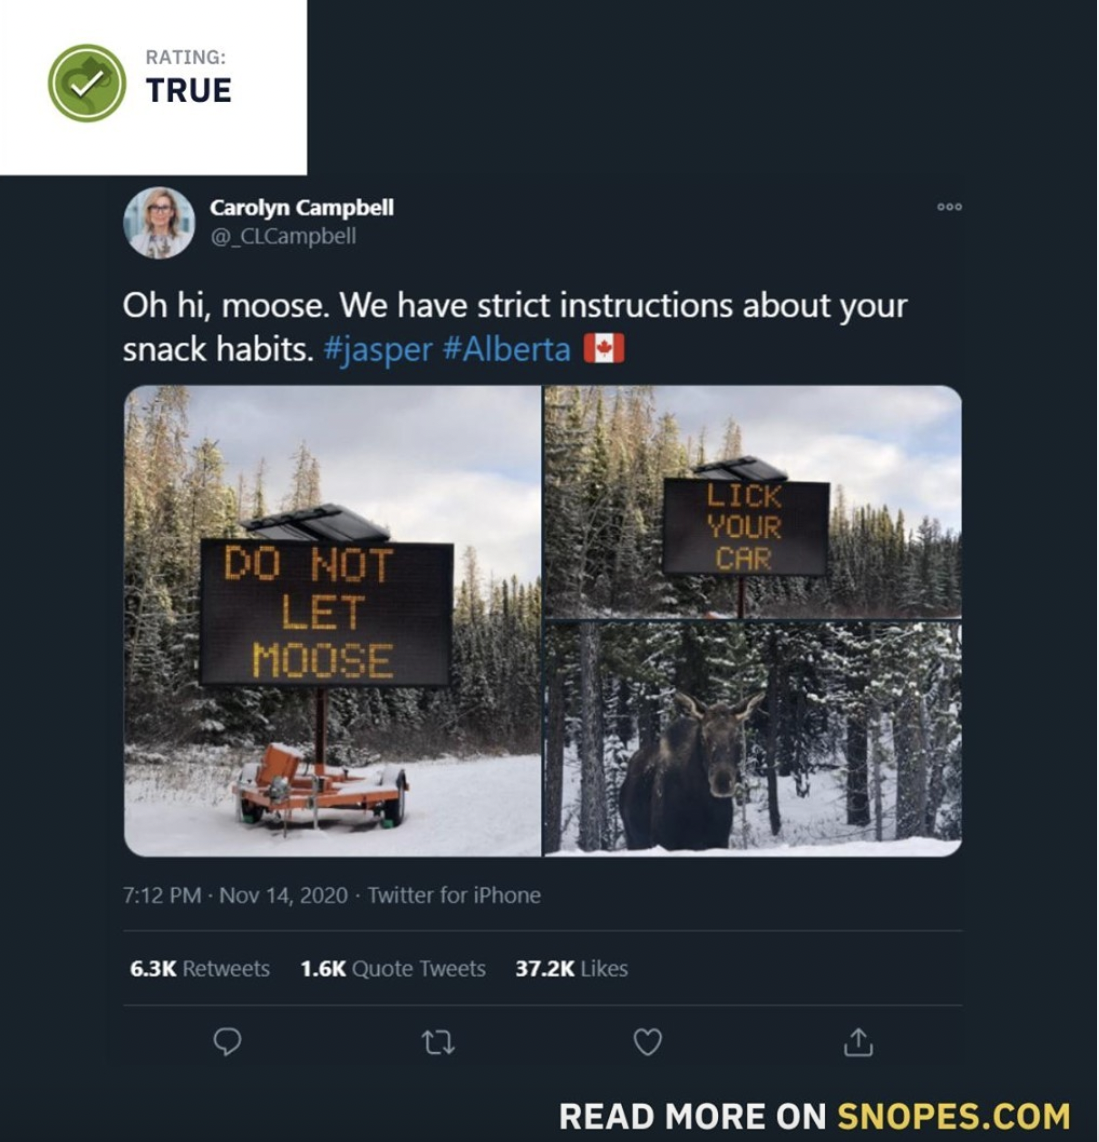 Snopes Facts - display advertising - Rating True Carolyn Campbell Oh hi, moose. We have strict instructions about your snack habits. | Lick Your Car Do Not Let Moose . Nov 14.2029 Twitter for iPhone Quote Tweets kes 17 Read More On Snopes.Com